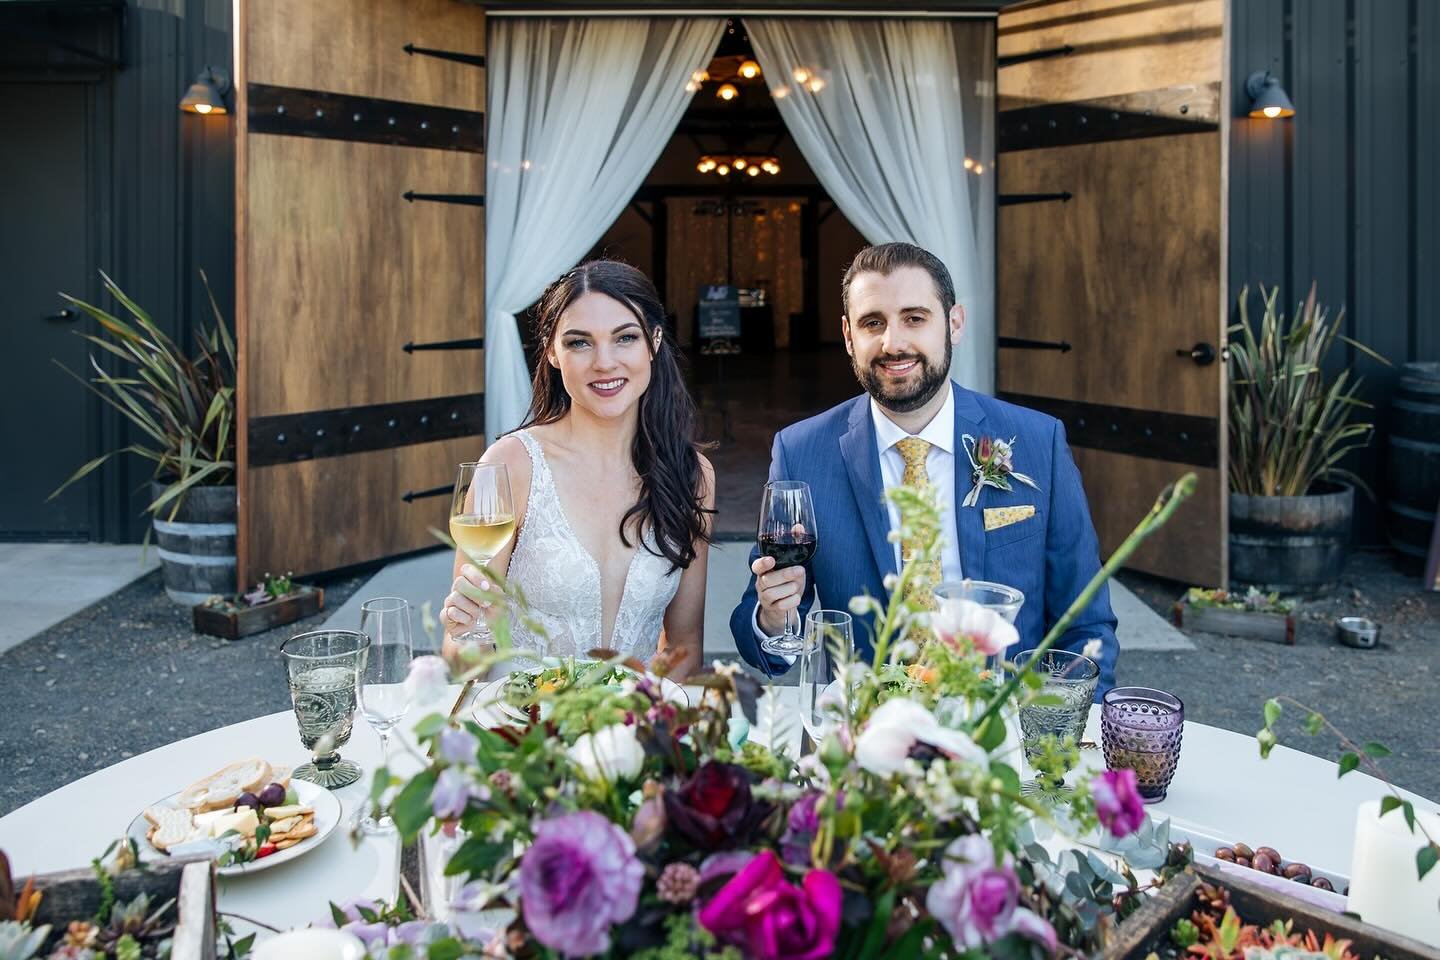 We hope you are having a beautiful feast like this one today by @preferredsonomacaterers on your 5th Anniversary. Cheers to you 🥂
Photos by Hok Leung

#thehighlandsestate
#destinationwedding #sonomawedding #napawedding #winecountrywedding #bayareawe